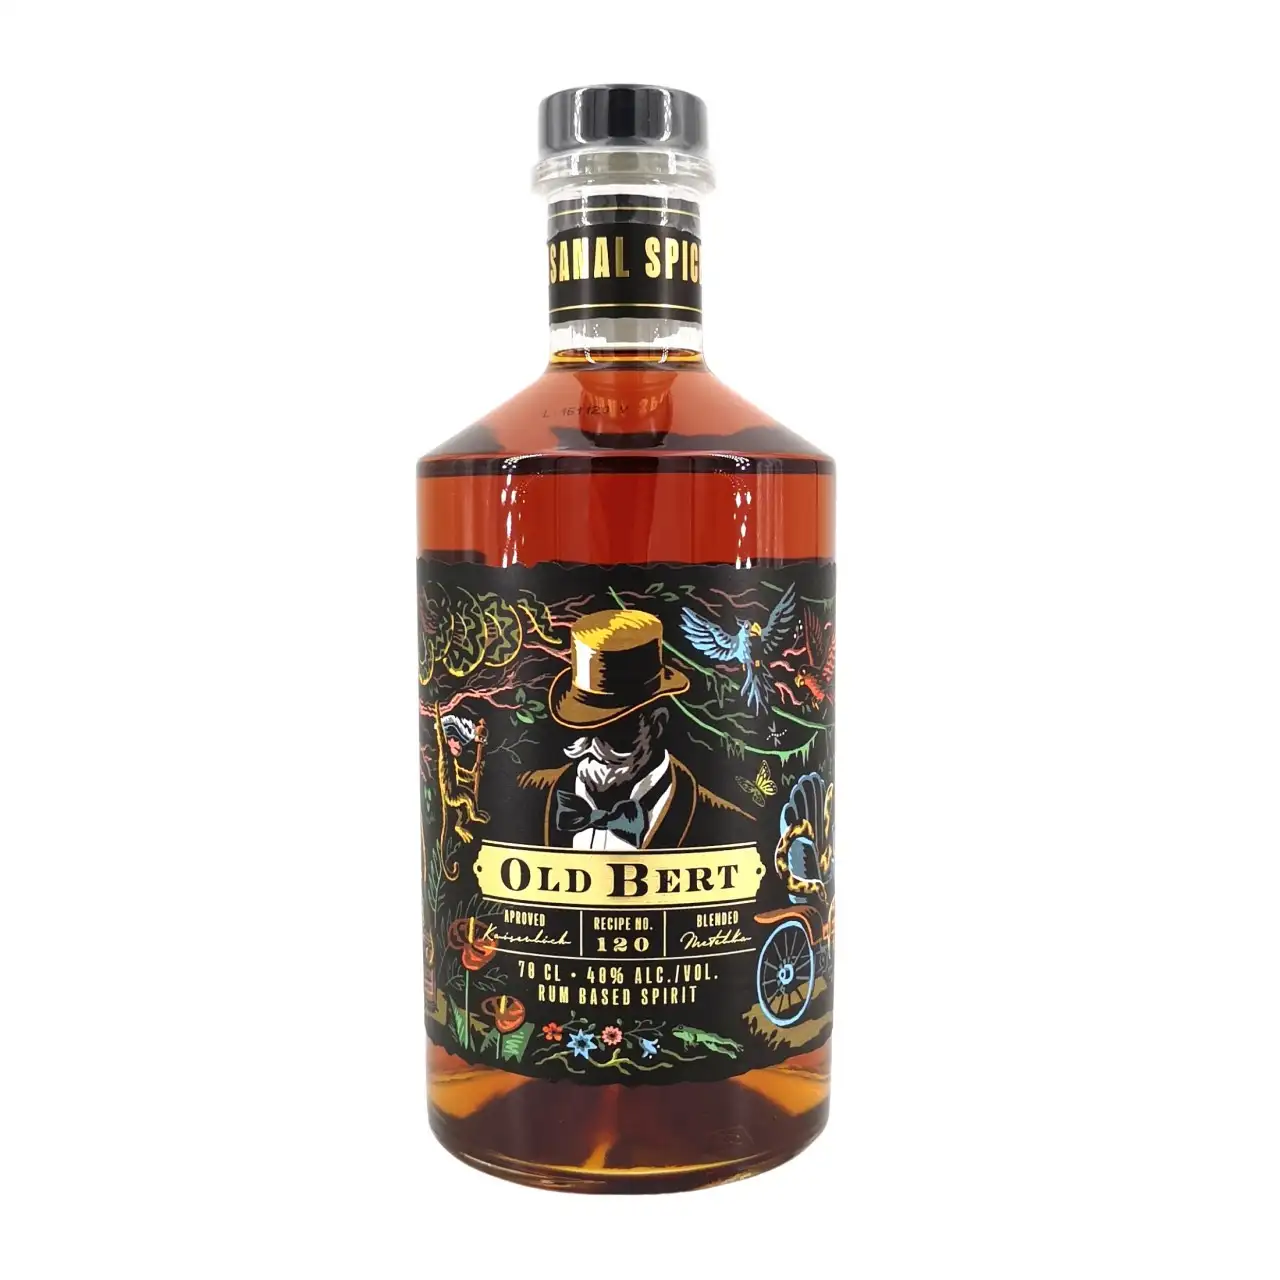 Image of the front of the bottle of the rum Old Bert Jamaican Spiced (Recipe No. 120)